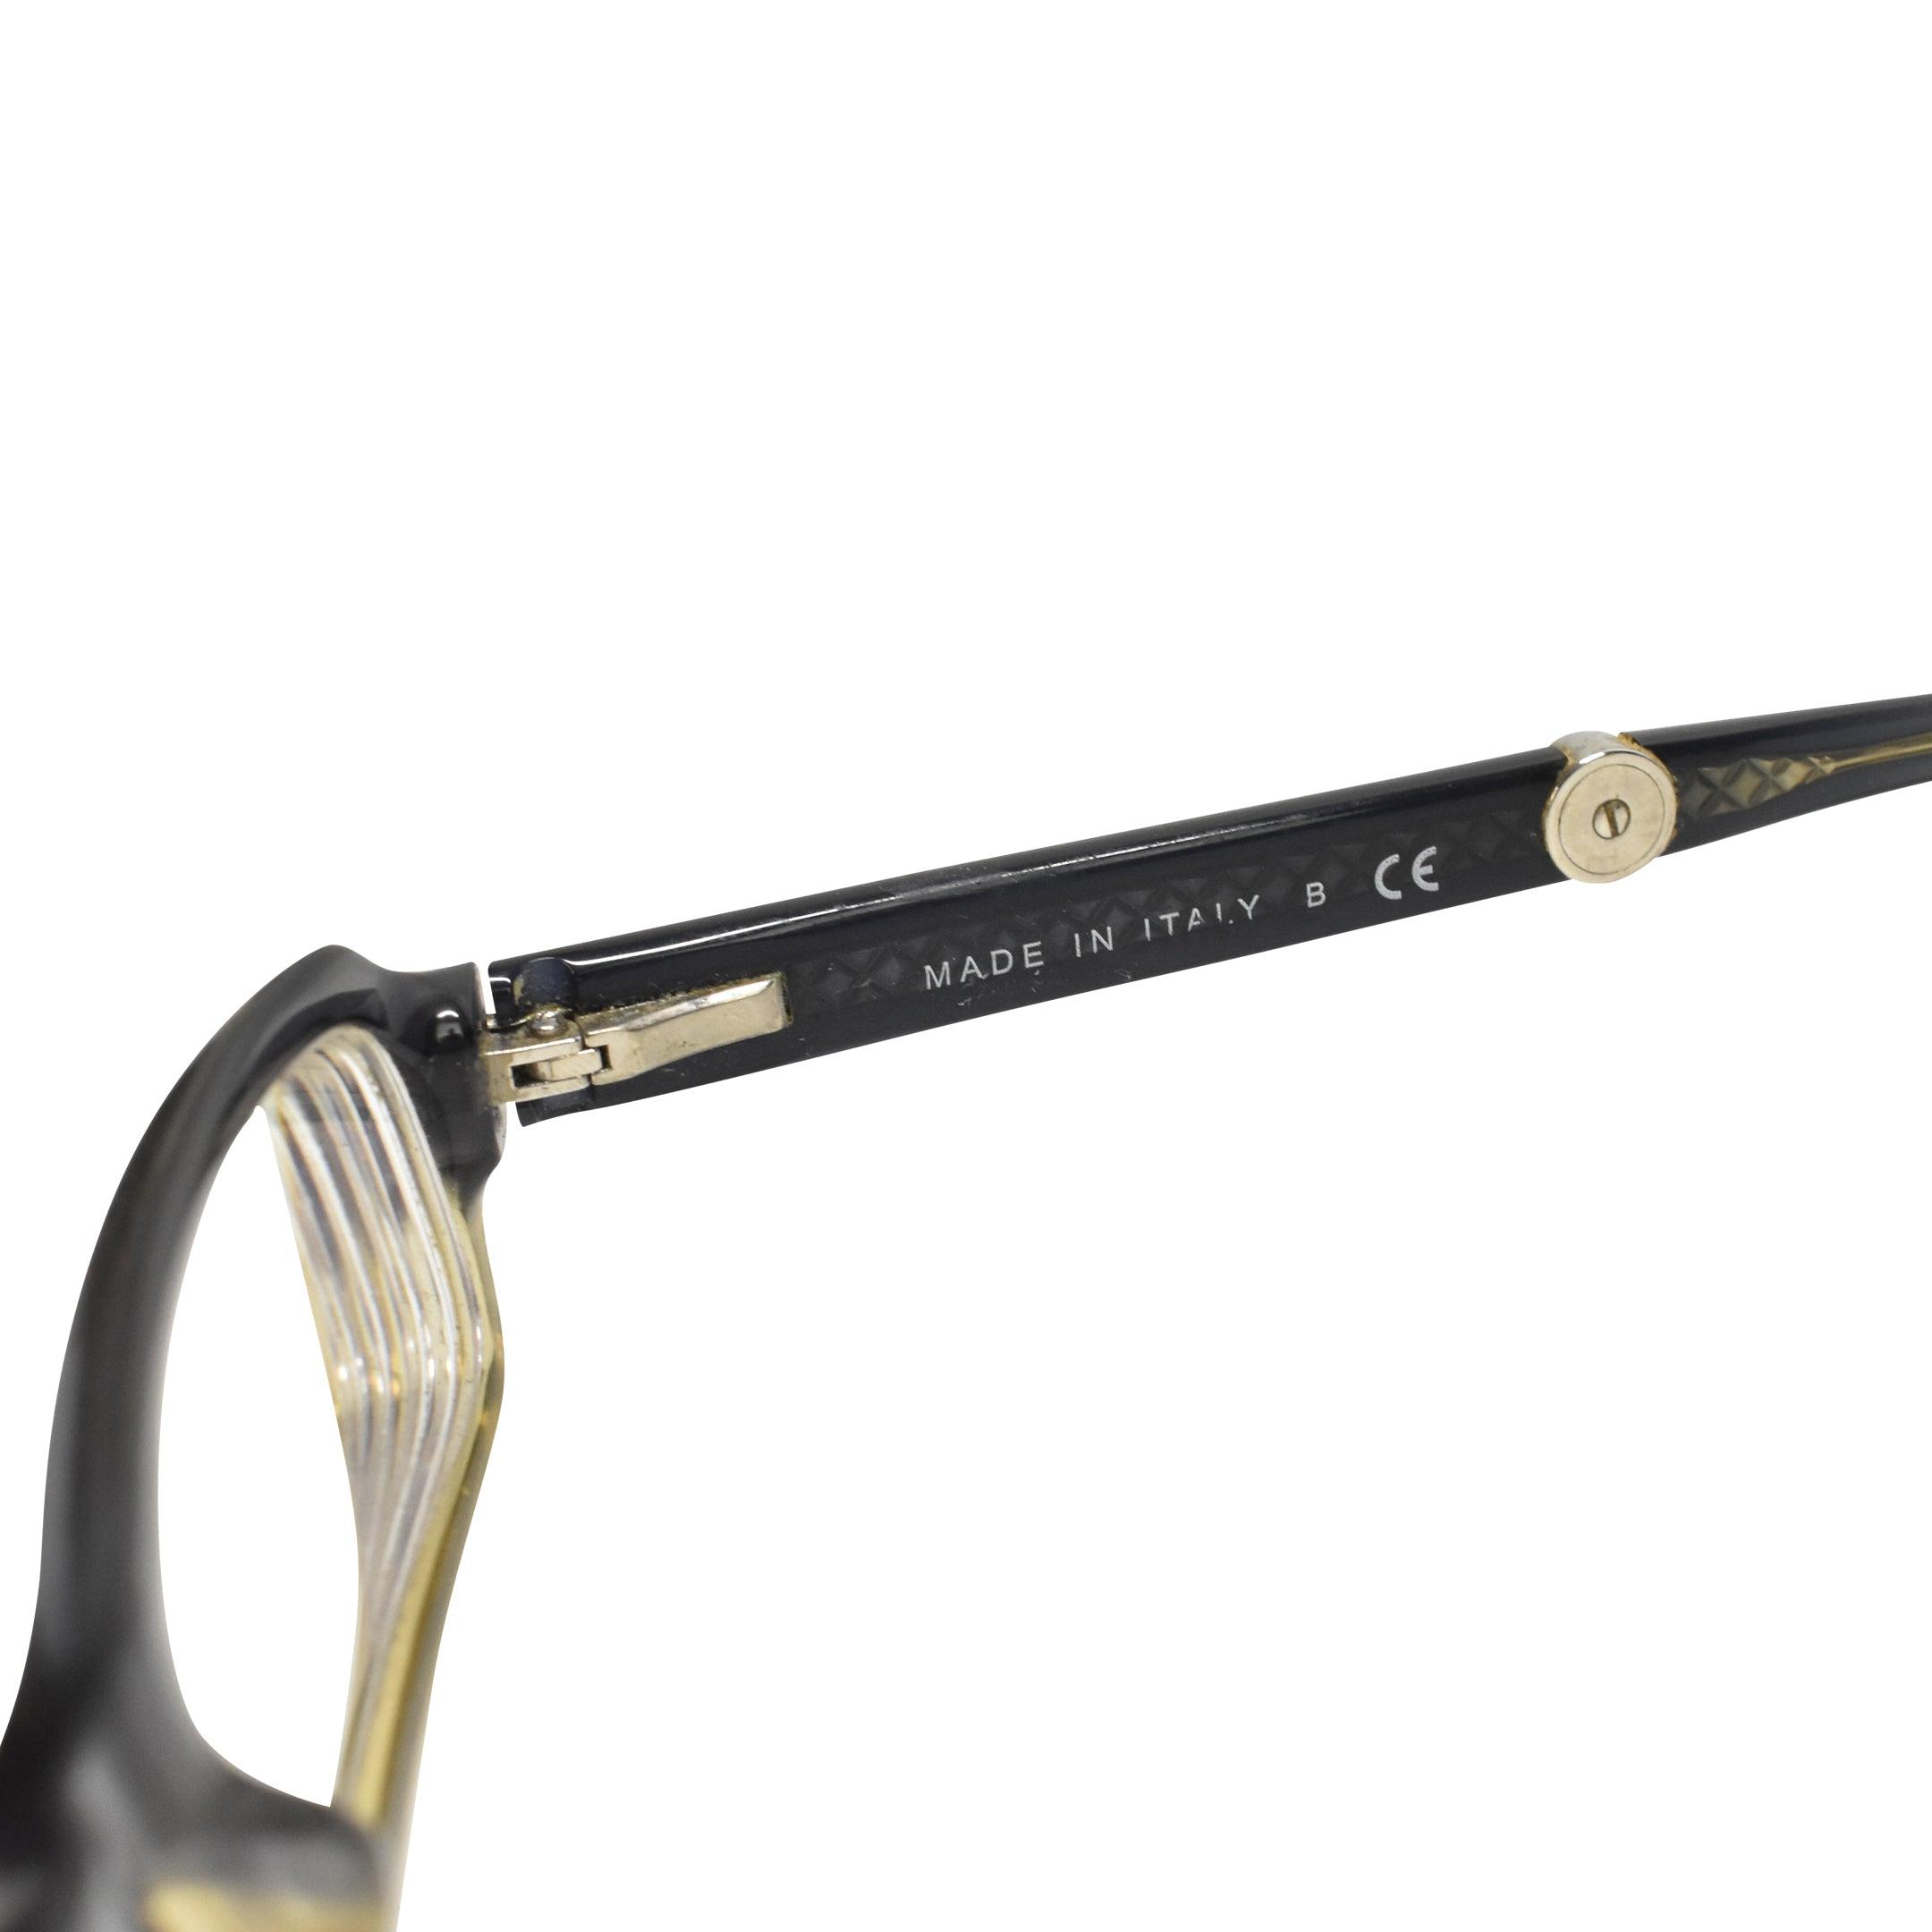 Chanel Reading Glasses - Fashionably Yours